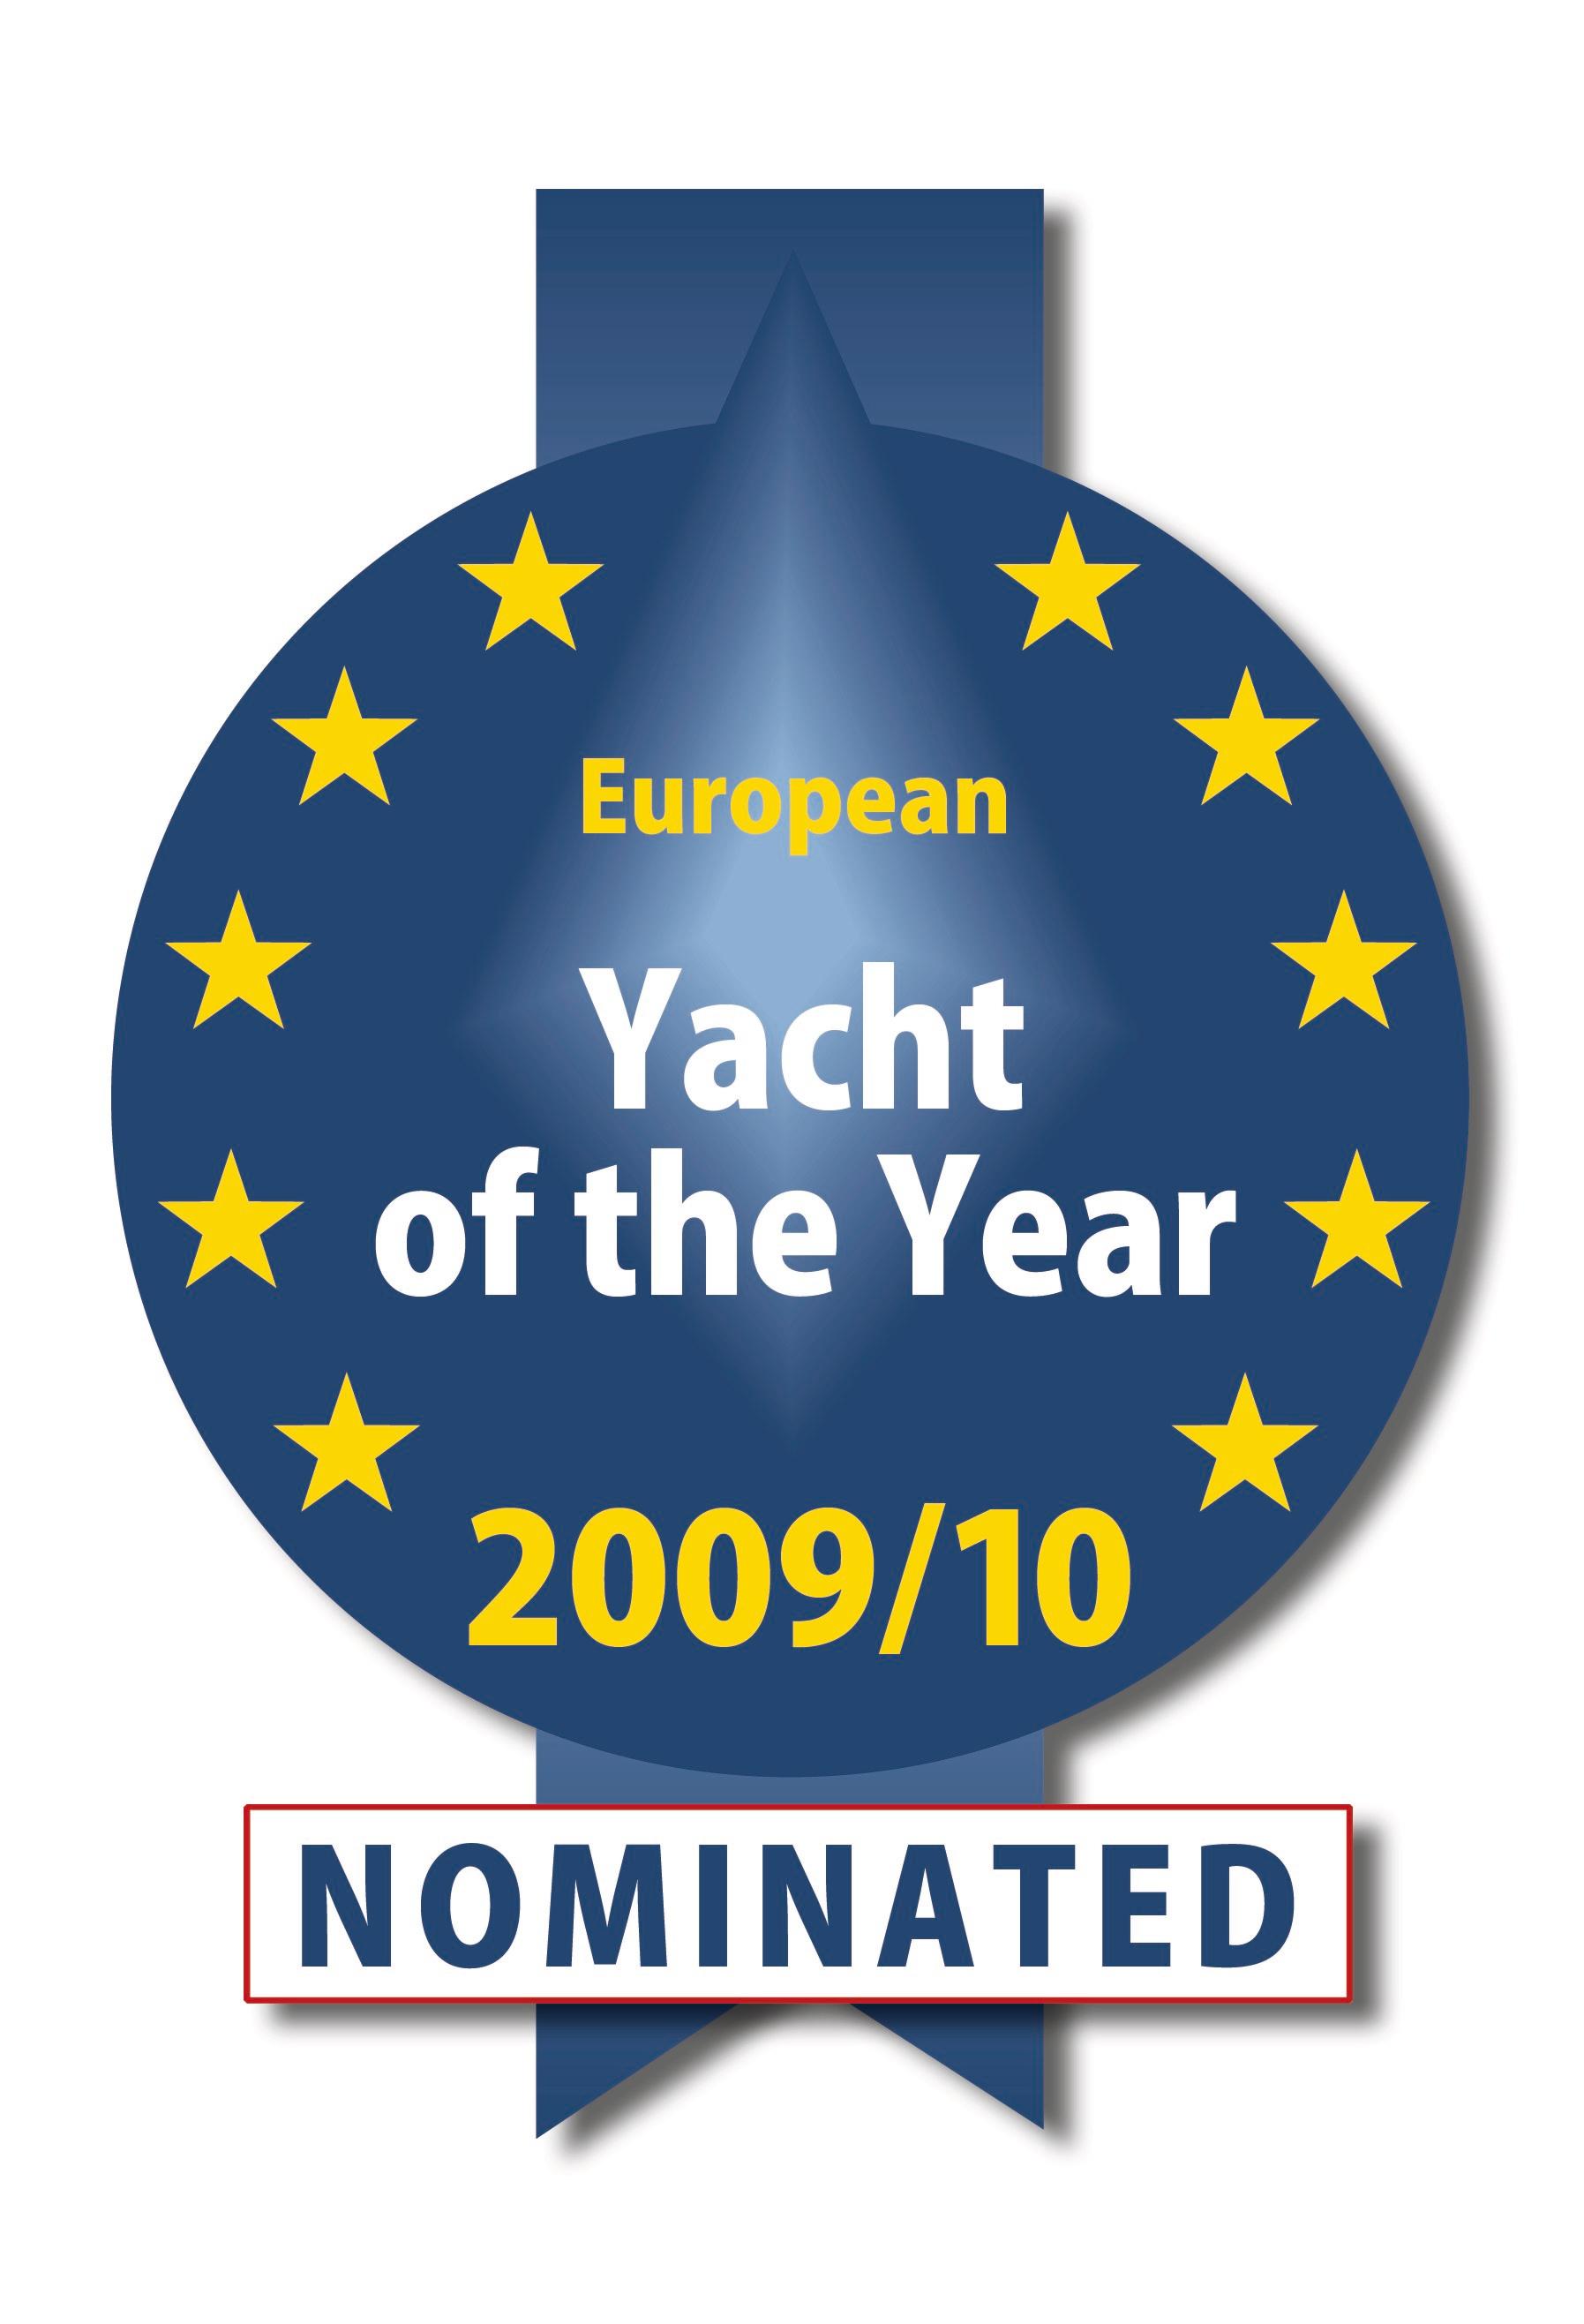 Bavaria Cruiser 32 is nominated for European Yacht of the Year